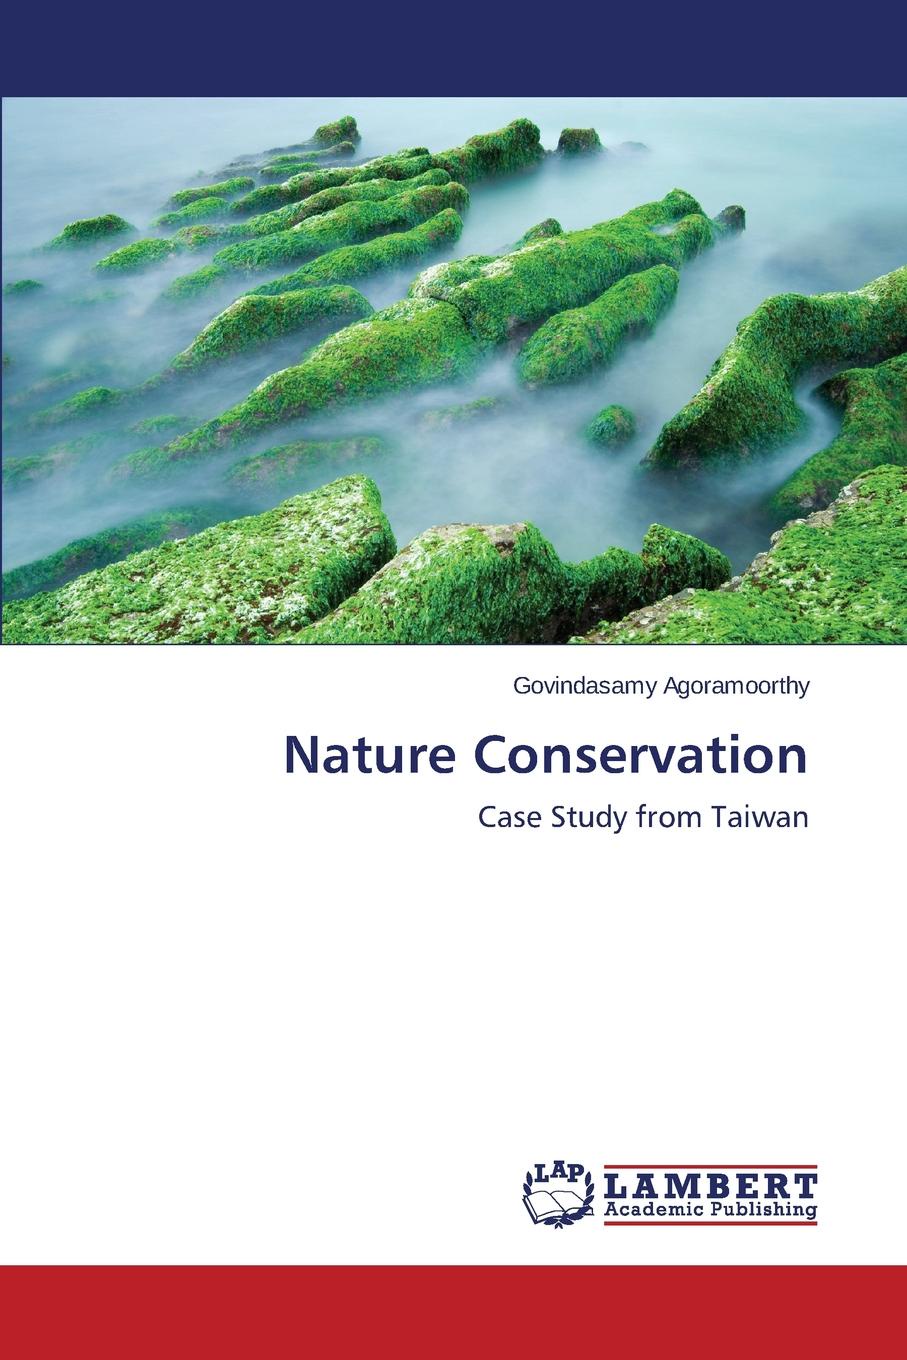 Natural conservation. Nature Conservation. Nature Conservation task. Picture nature Conservation. All-Russian Society for the Conservation of nature.